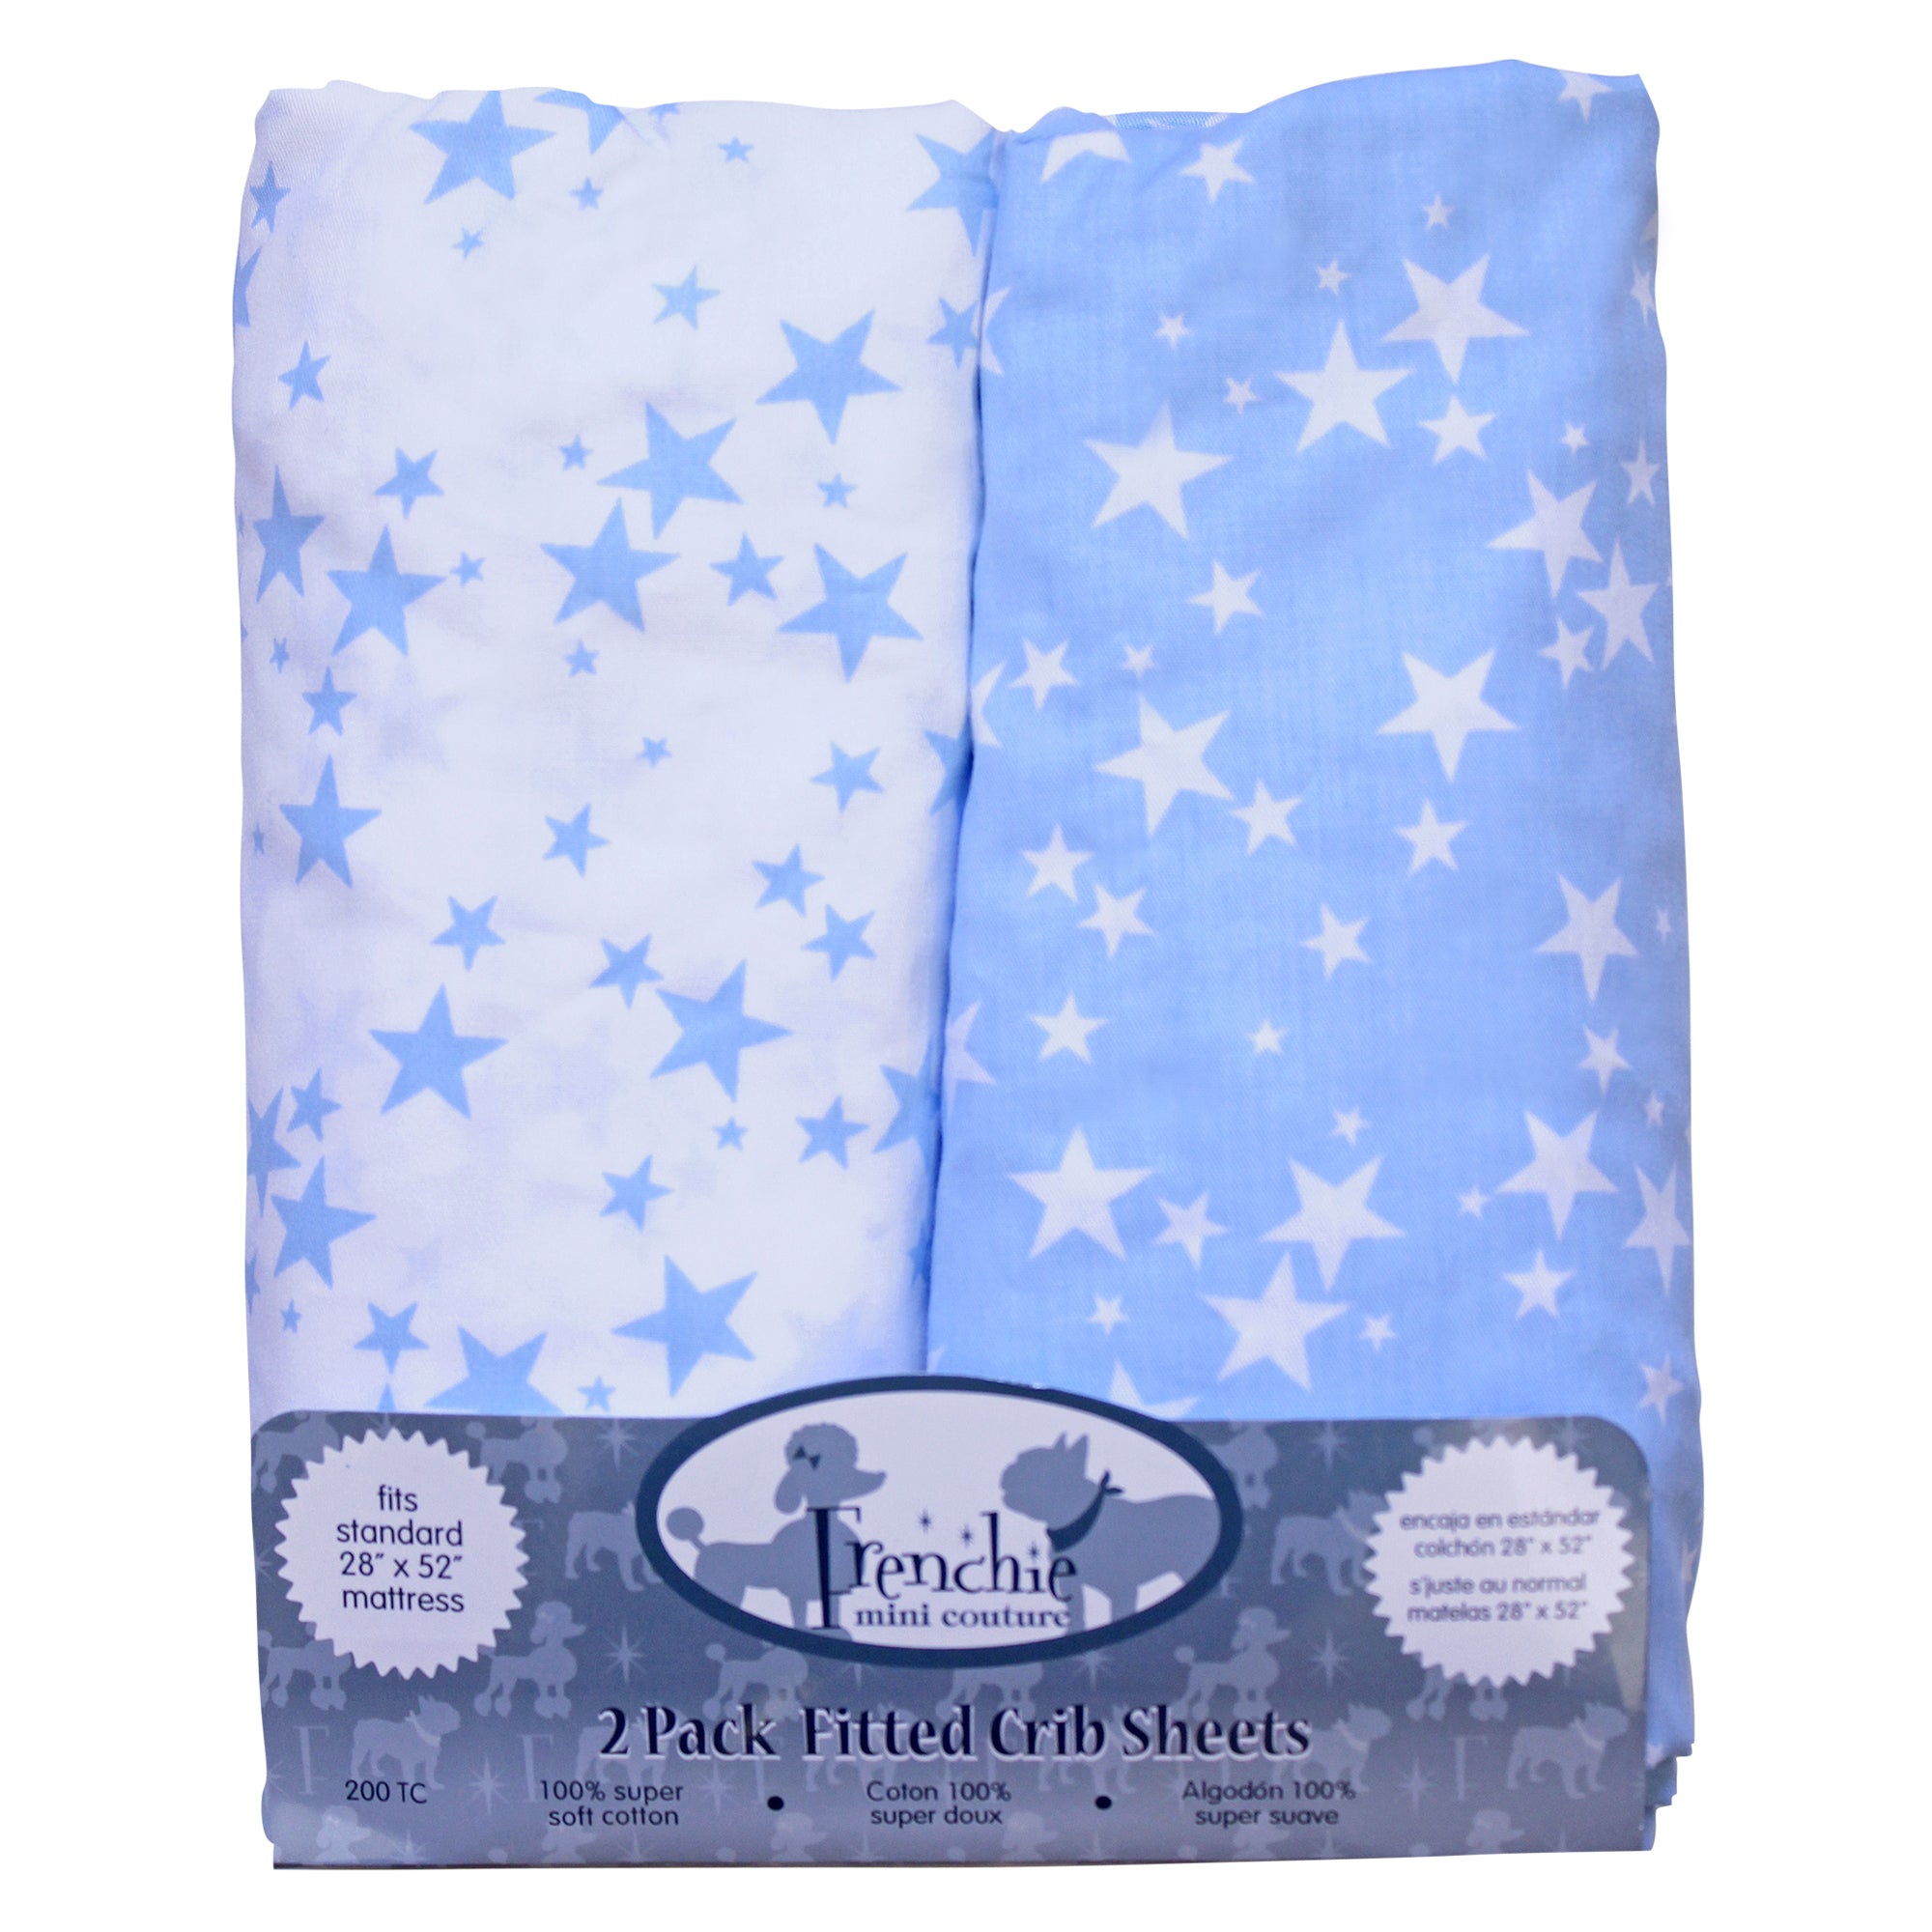 Fitted Crib Sheet 2 Pack, 100% Woven Cotton (Blue Sars)